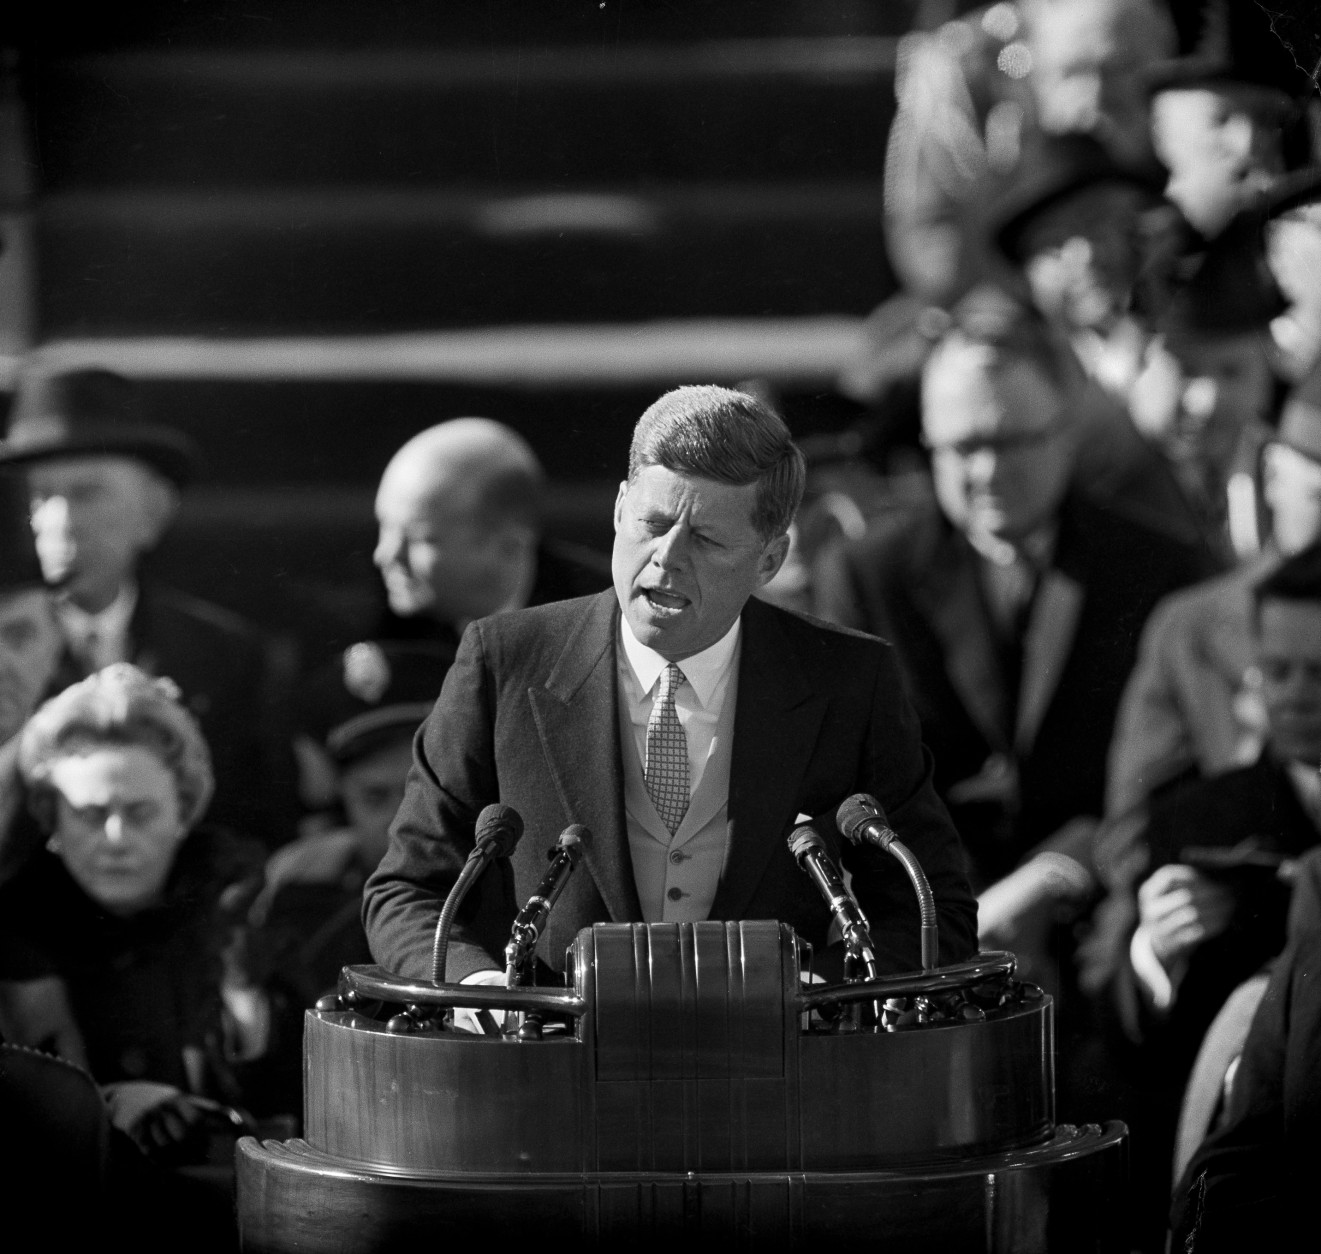 After taking oath of office, U.S. President John F. Kennedy delivers his inaugural address at Capitol Hill in Washington, D.C., on Jan. 20, 1961. Kennedy said, "We shall pay any price, bear any burden, meet any hardship, support any friend, oppose any foe, to assure the survival and success of liberty. (AP Photo)